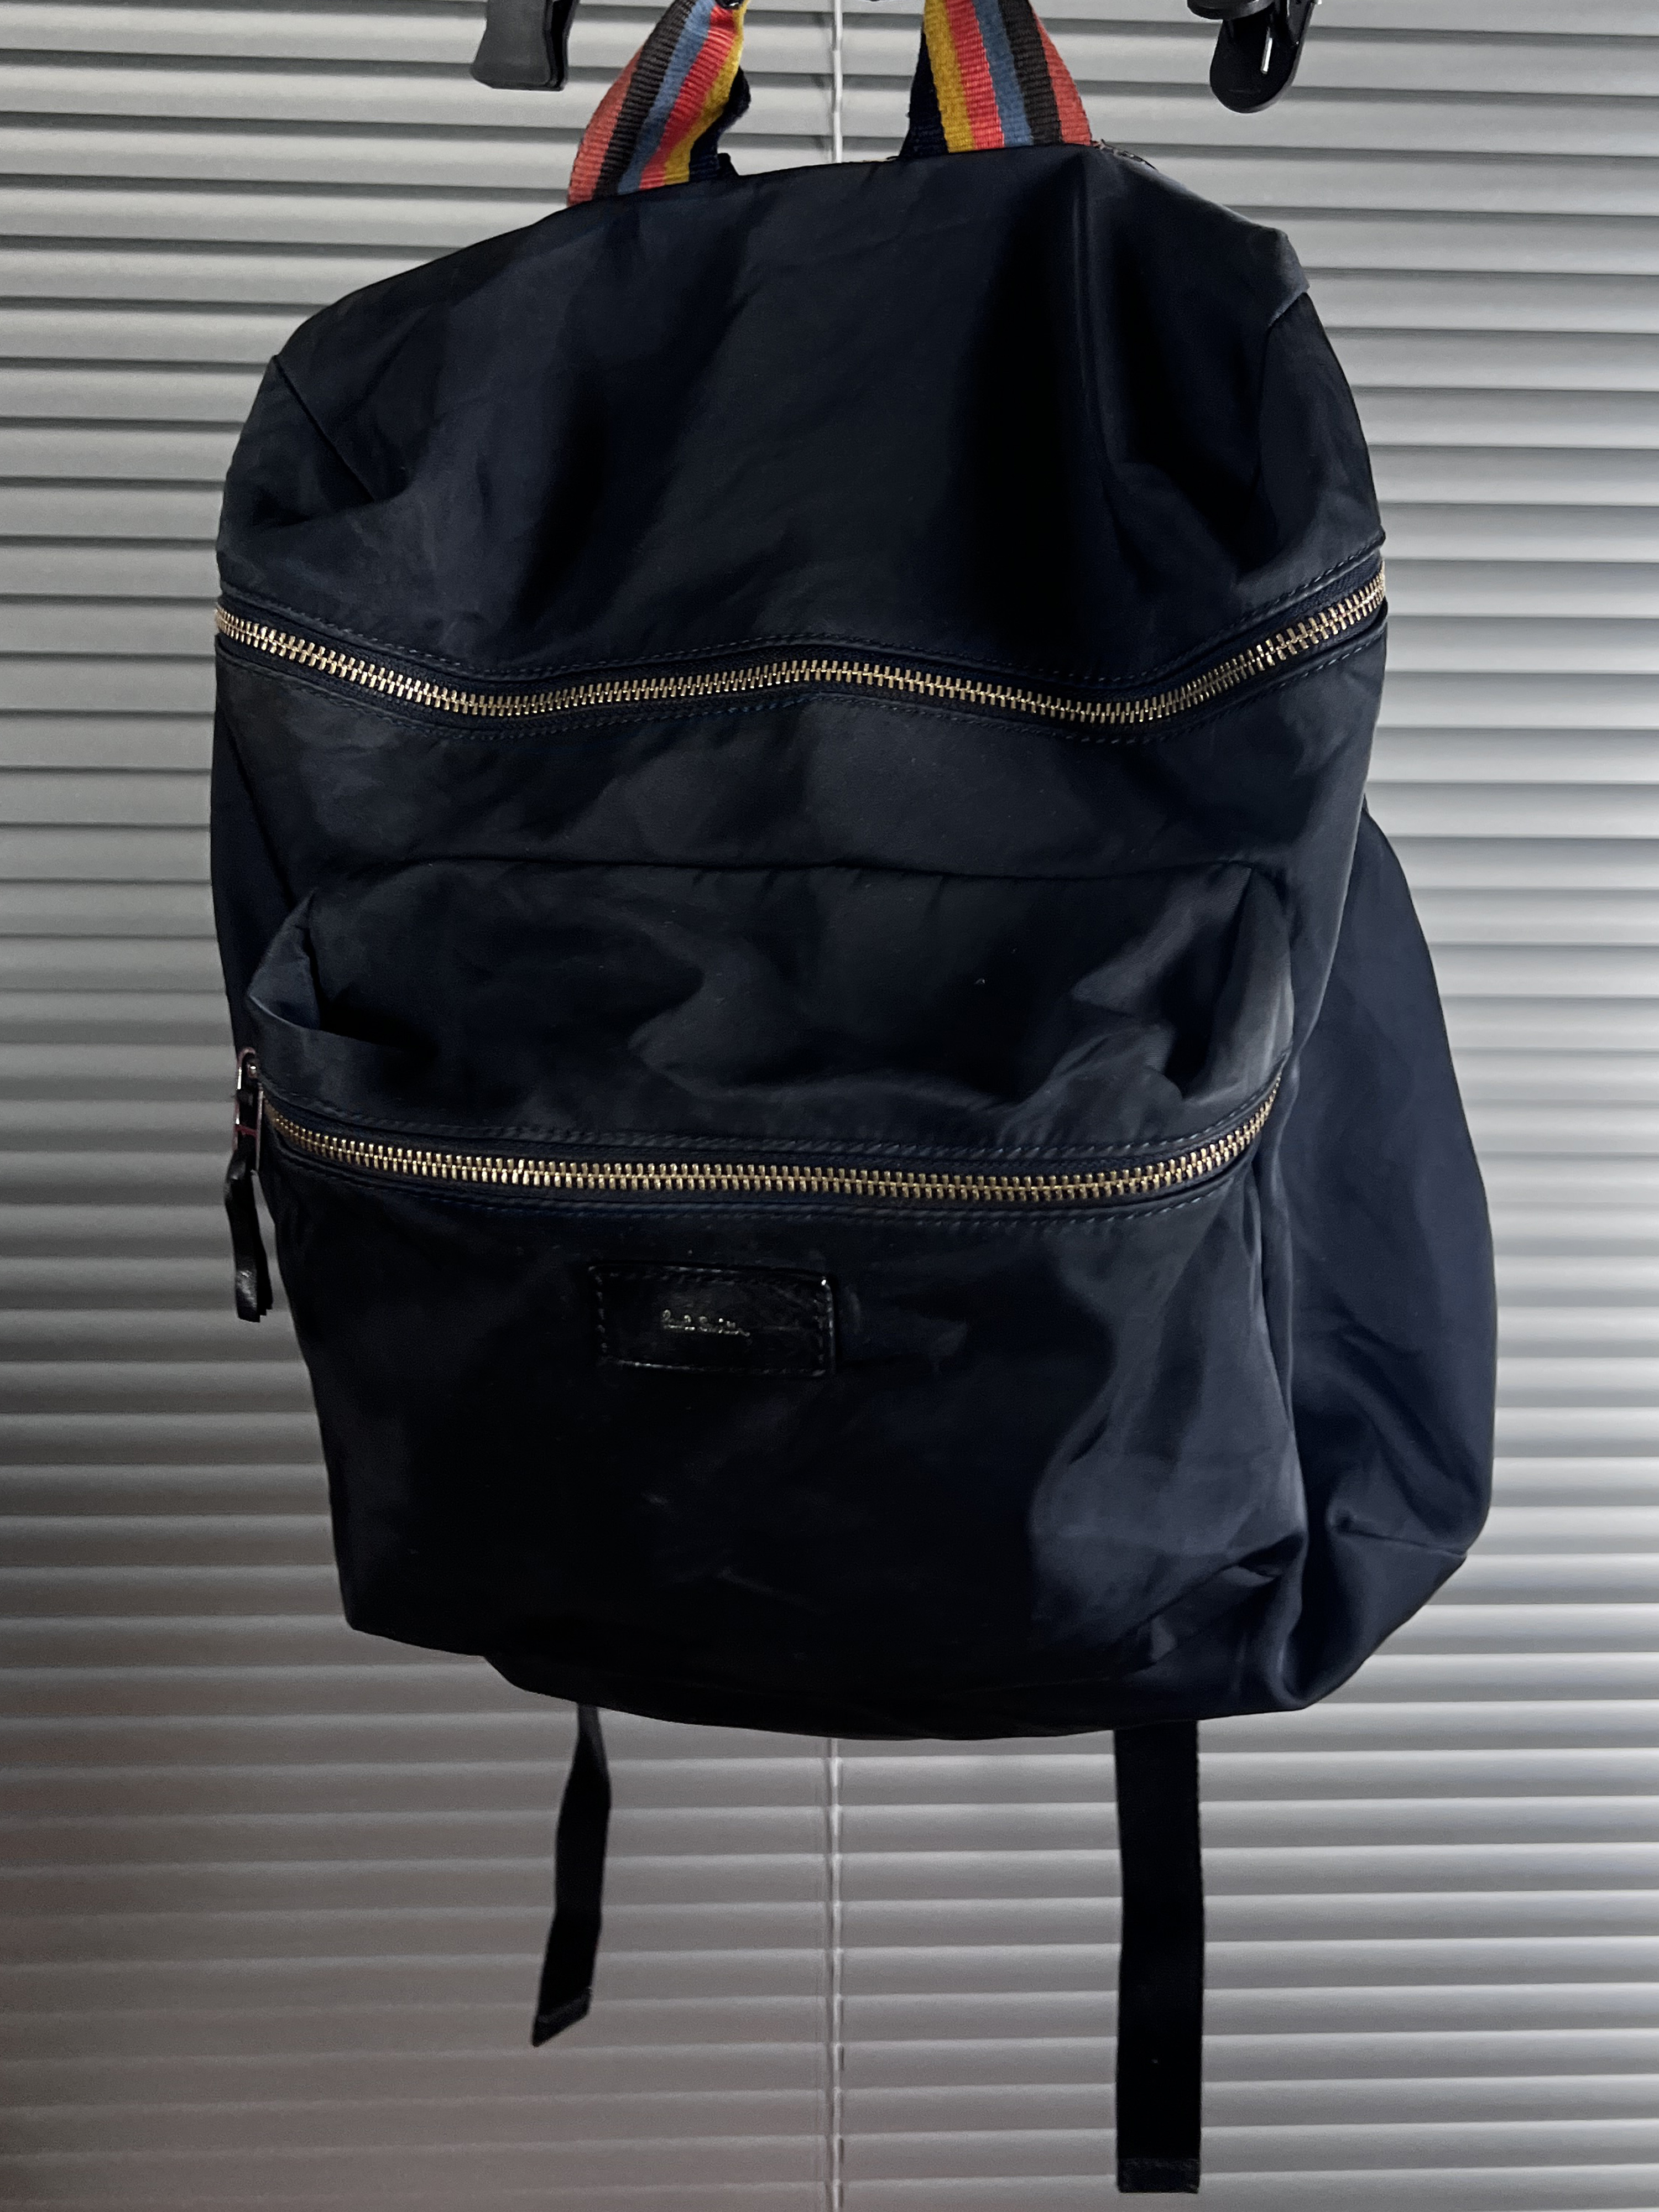 Paul Smith backpack